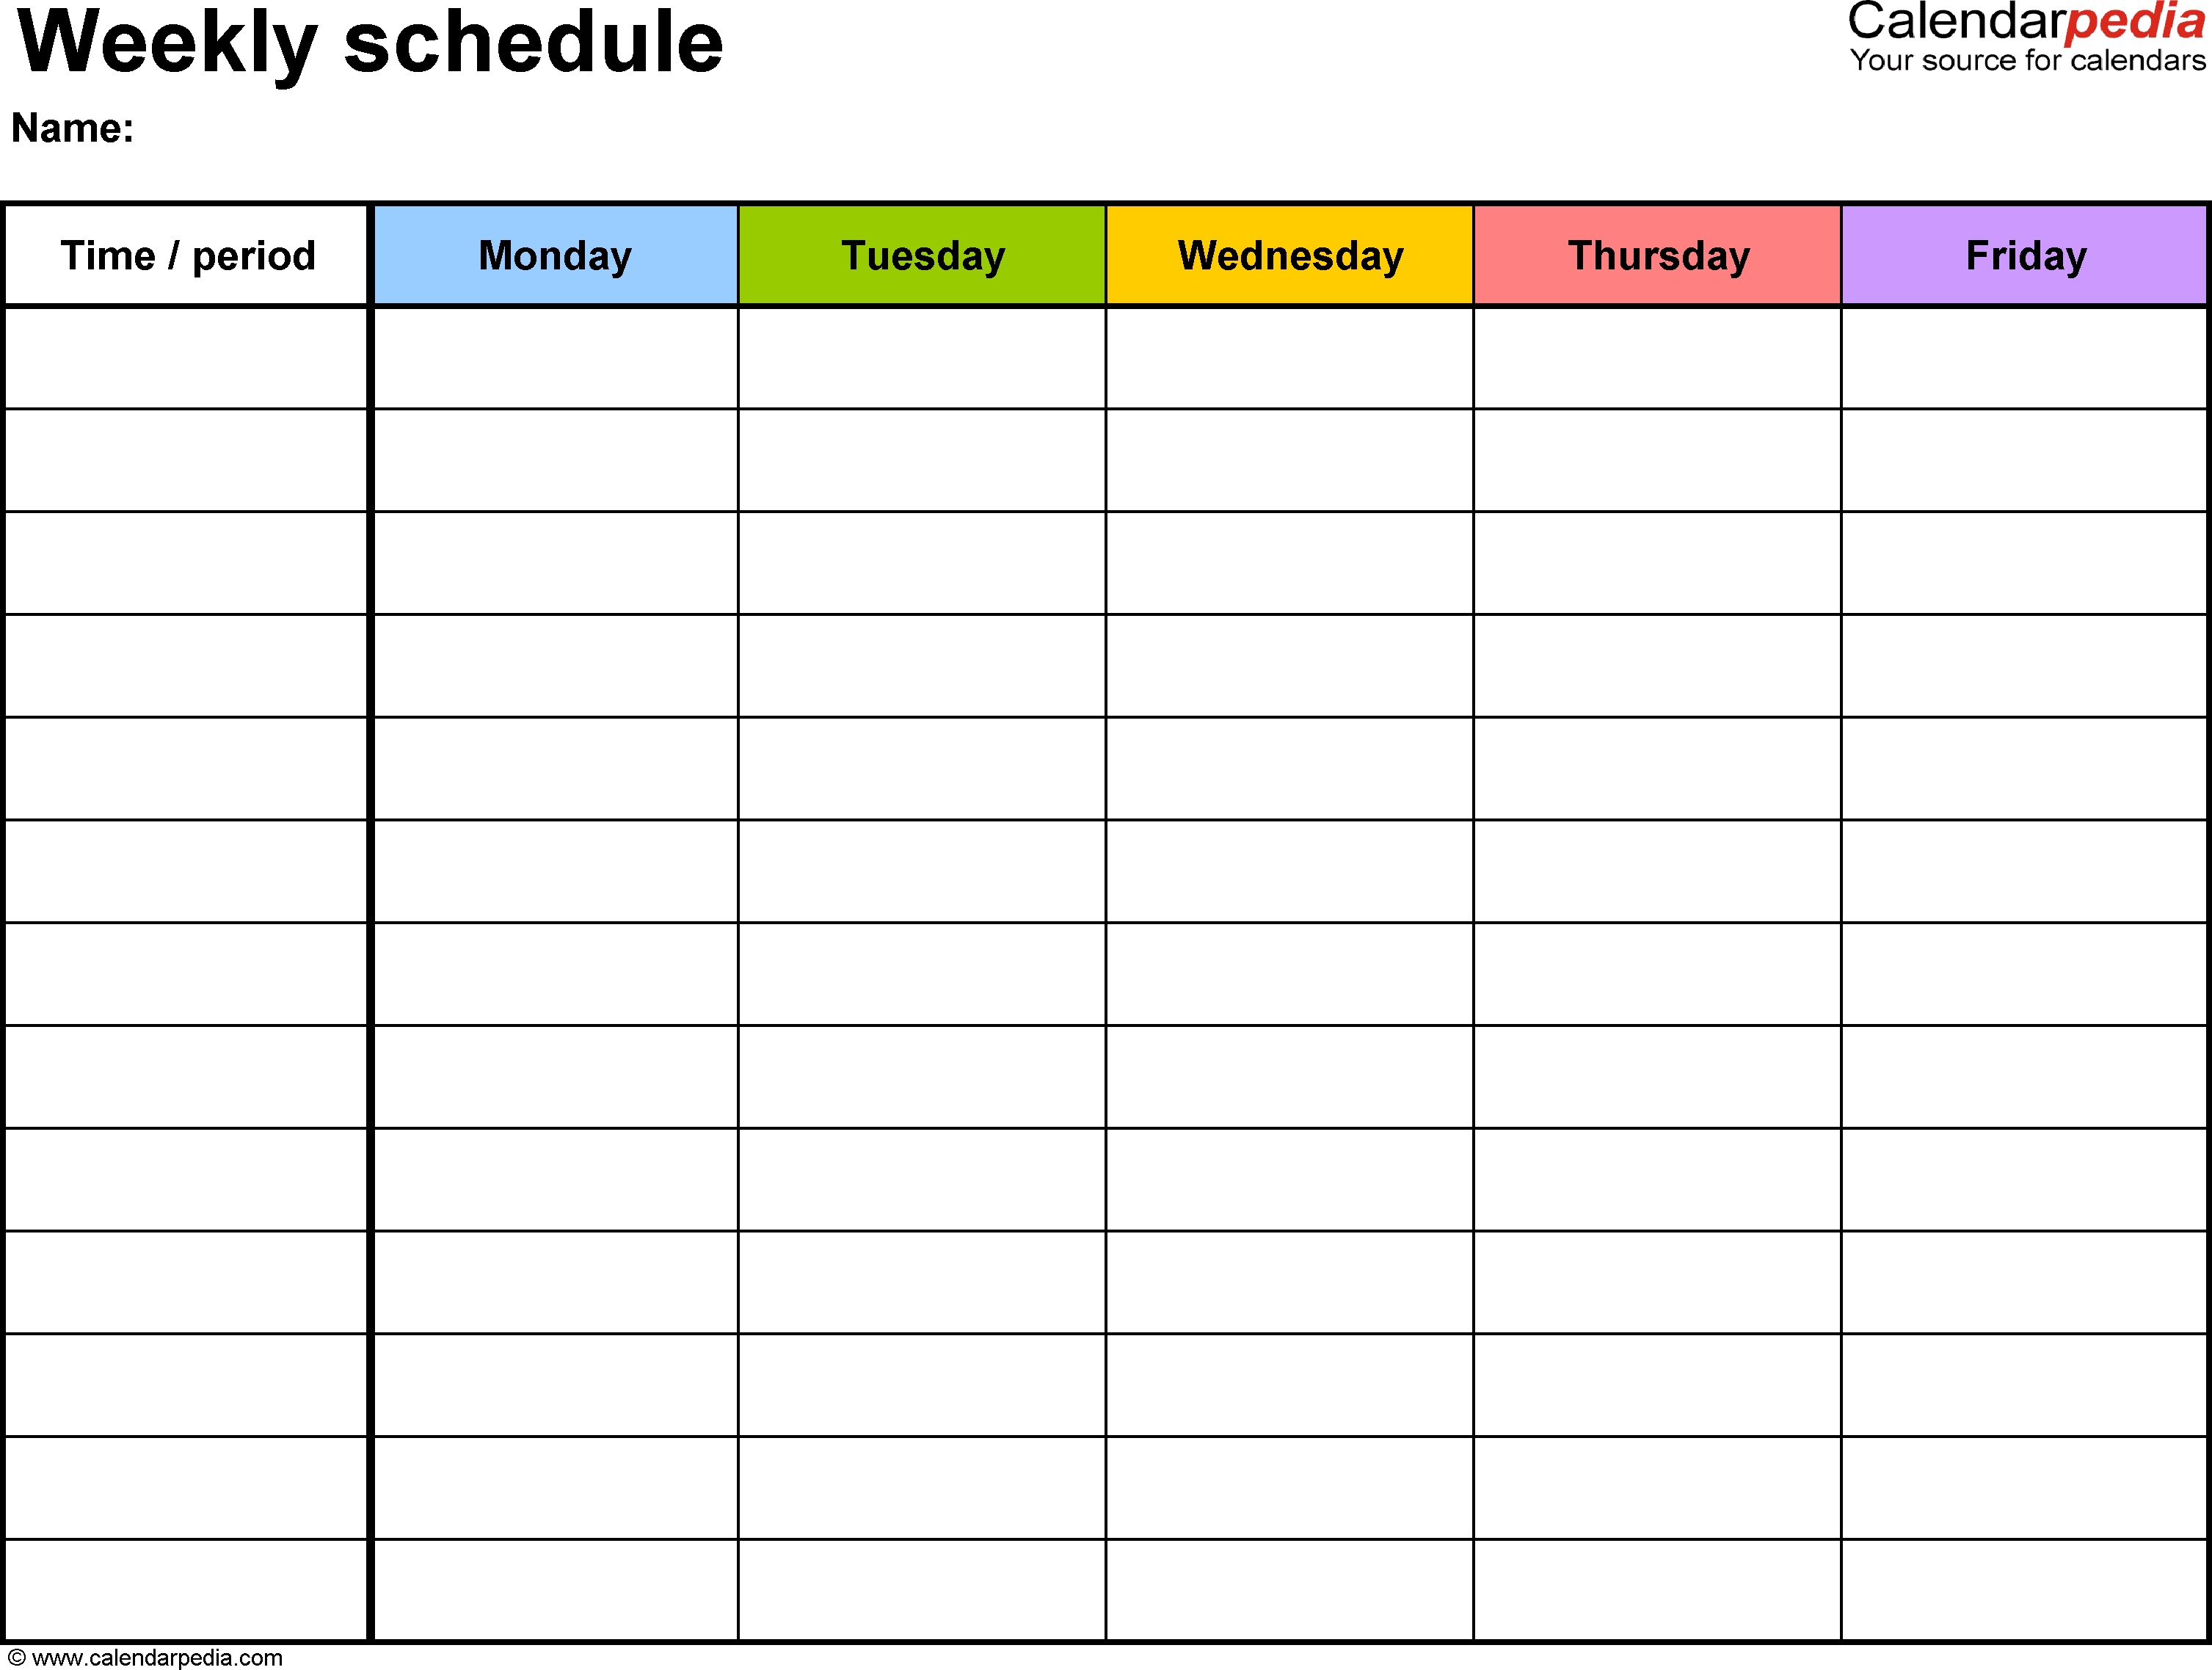 Free Weekly Schedule Templates For Word - 18 Templates Extraordinary Blank Calendar Template 5 Day Week